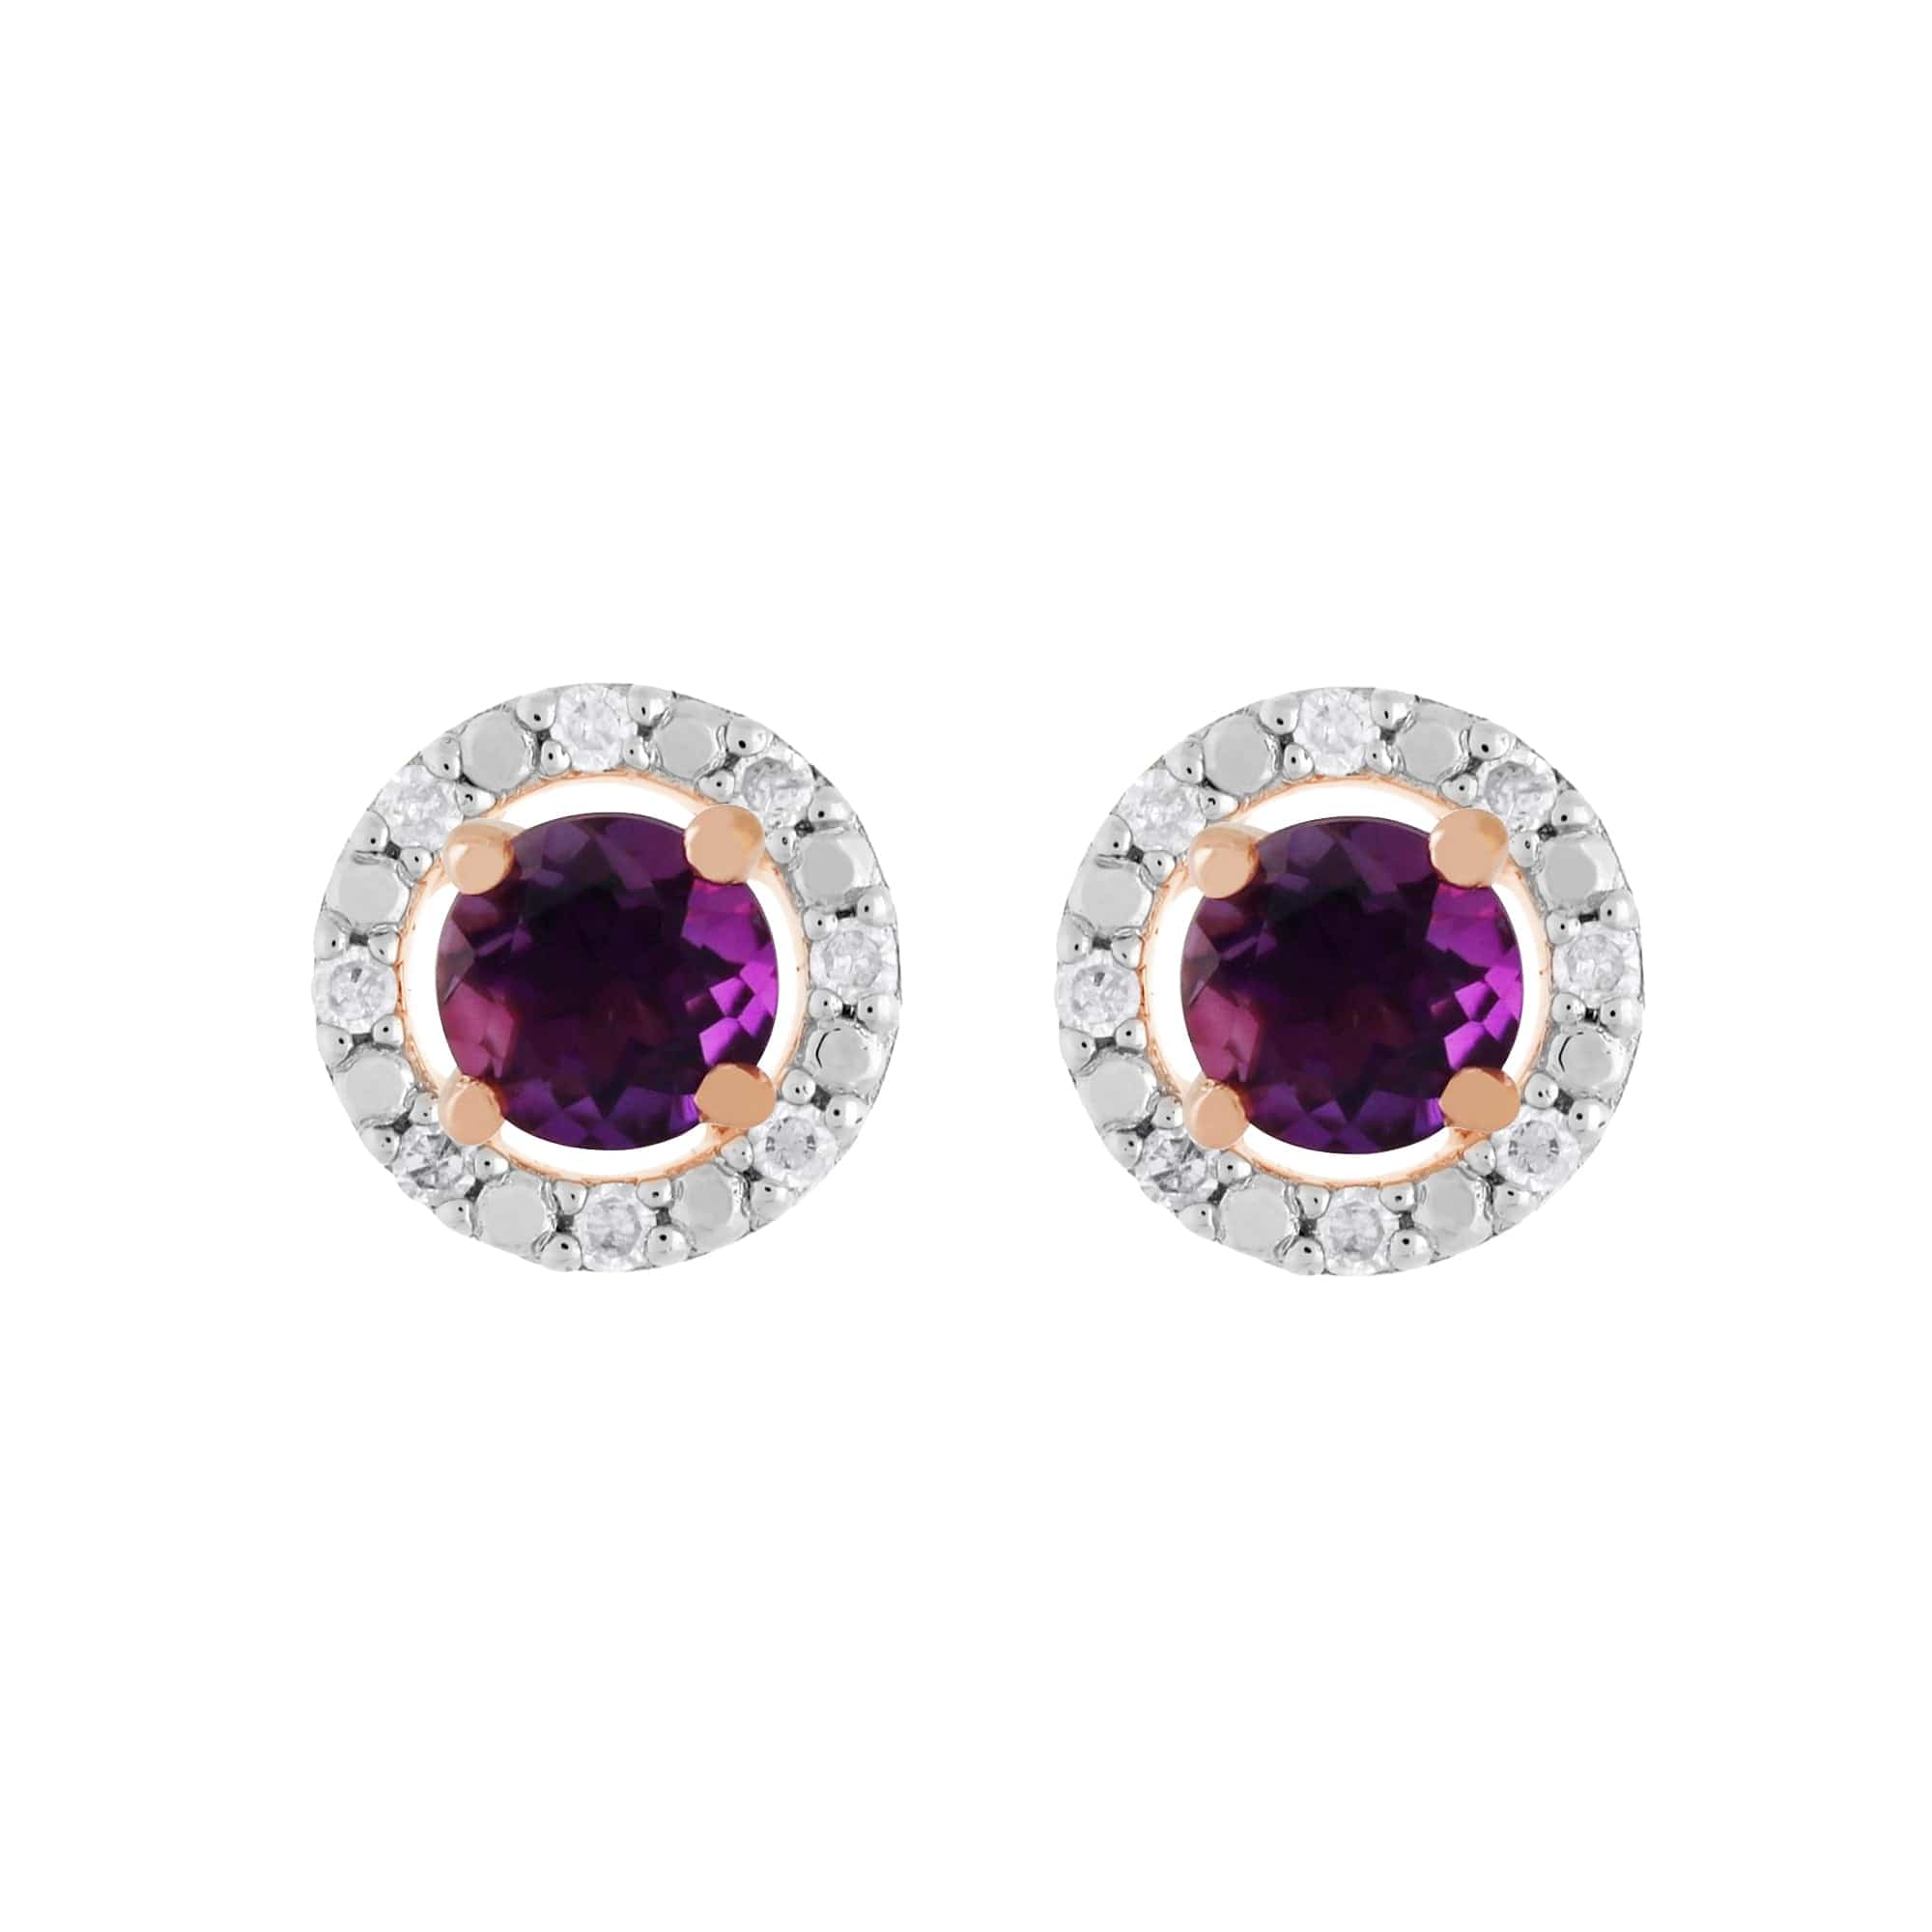 183E4316059-191E0377019 Classic Round Amethyst Stud Earrings with Detachable Diamond Round Ear Jacket in 9ct Rose Gold 1